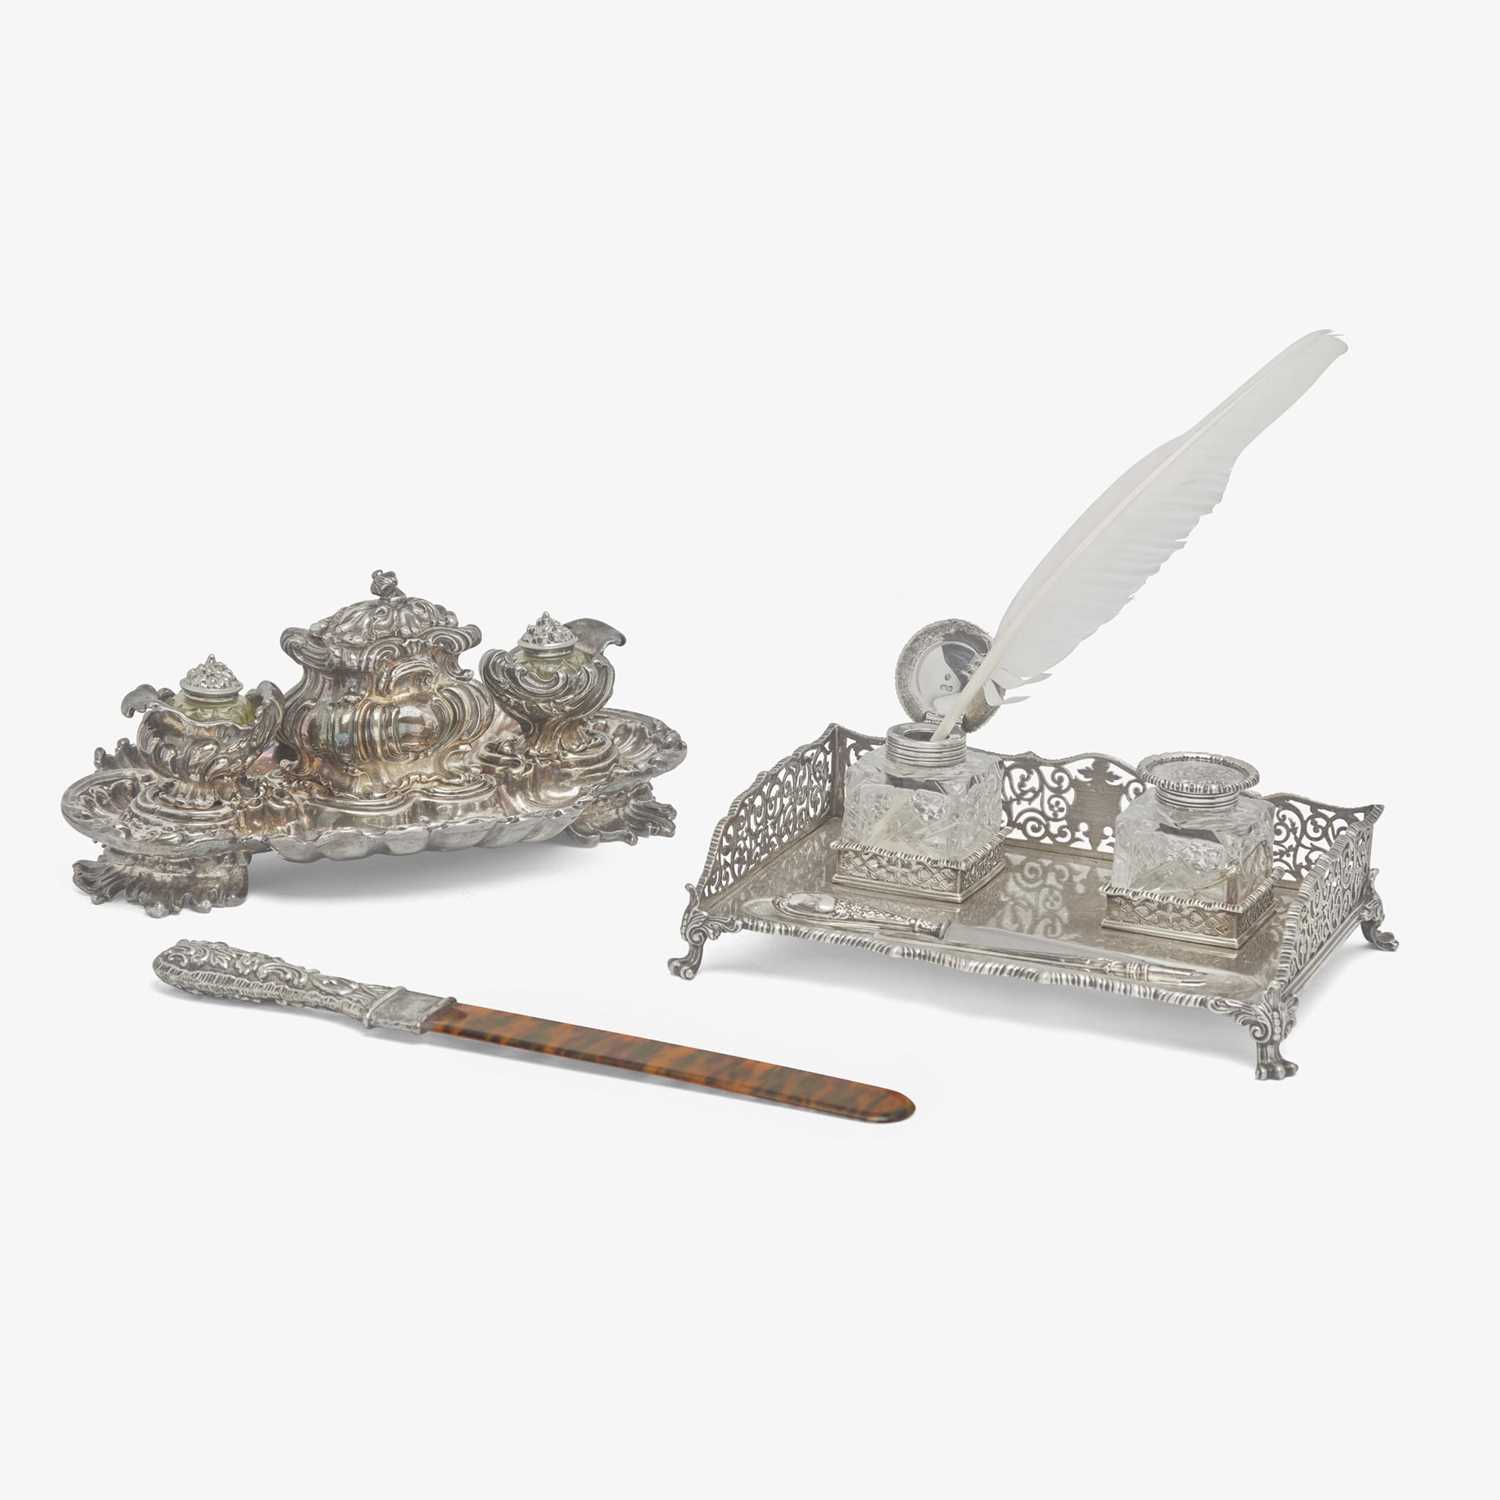 Lot 45 - An assorted group of sterling silver, silverplated, and sterling-silver mounted faux tortoiseshell desk items